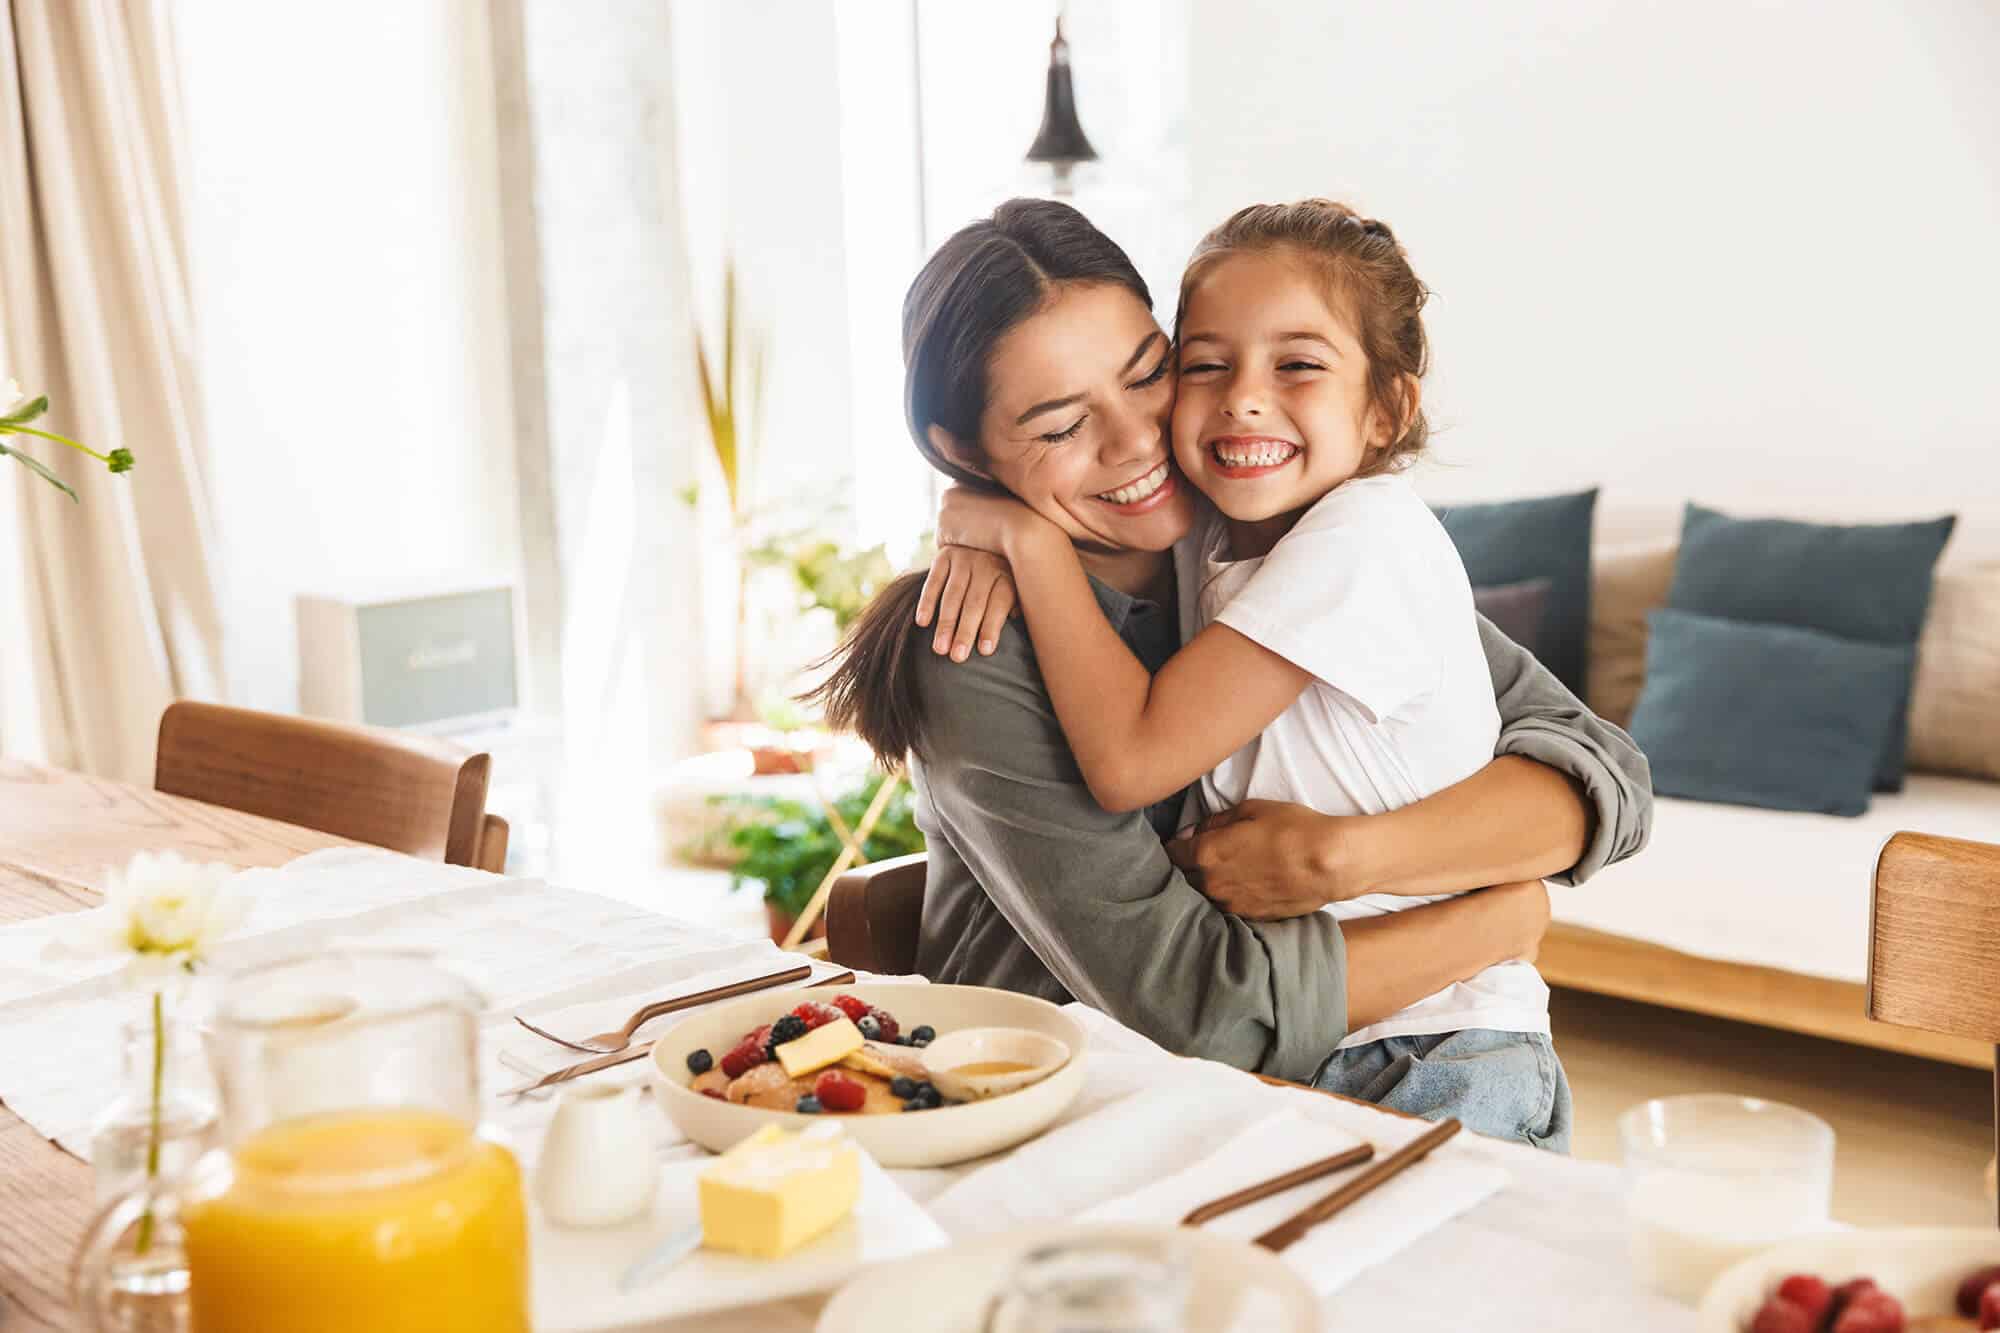 Mother and daughter hug while enjoying breakfast